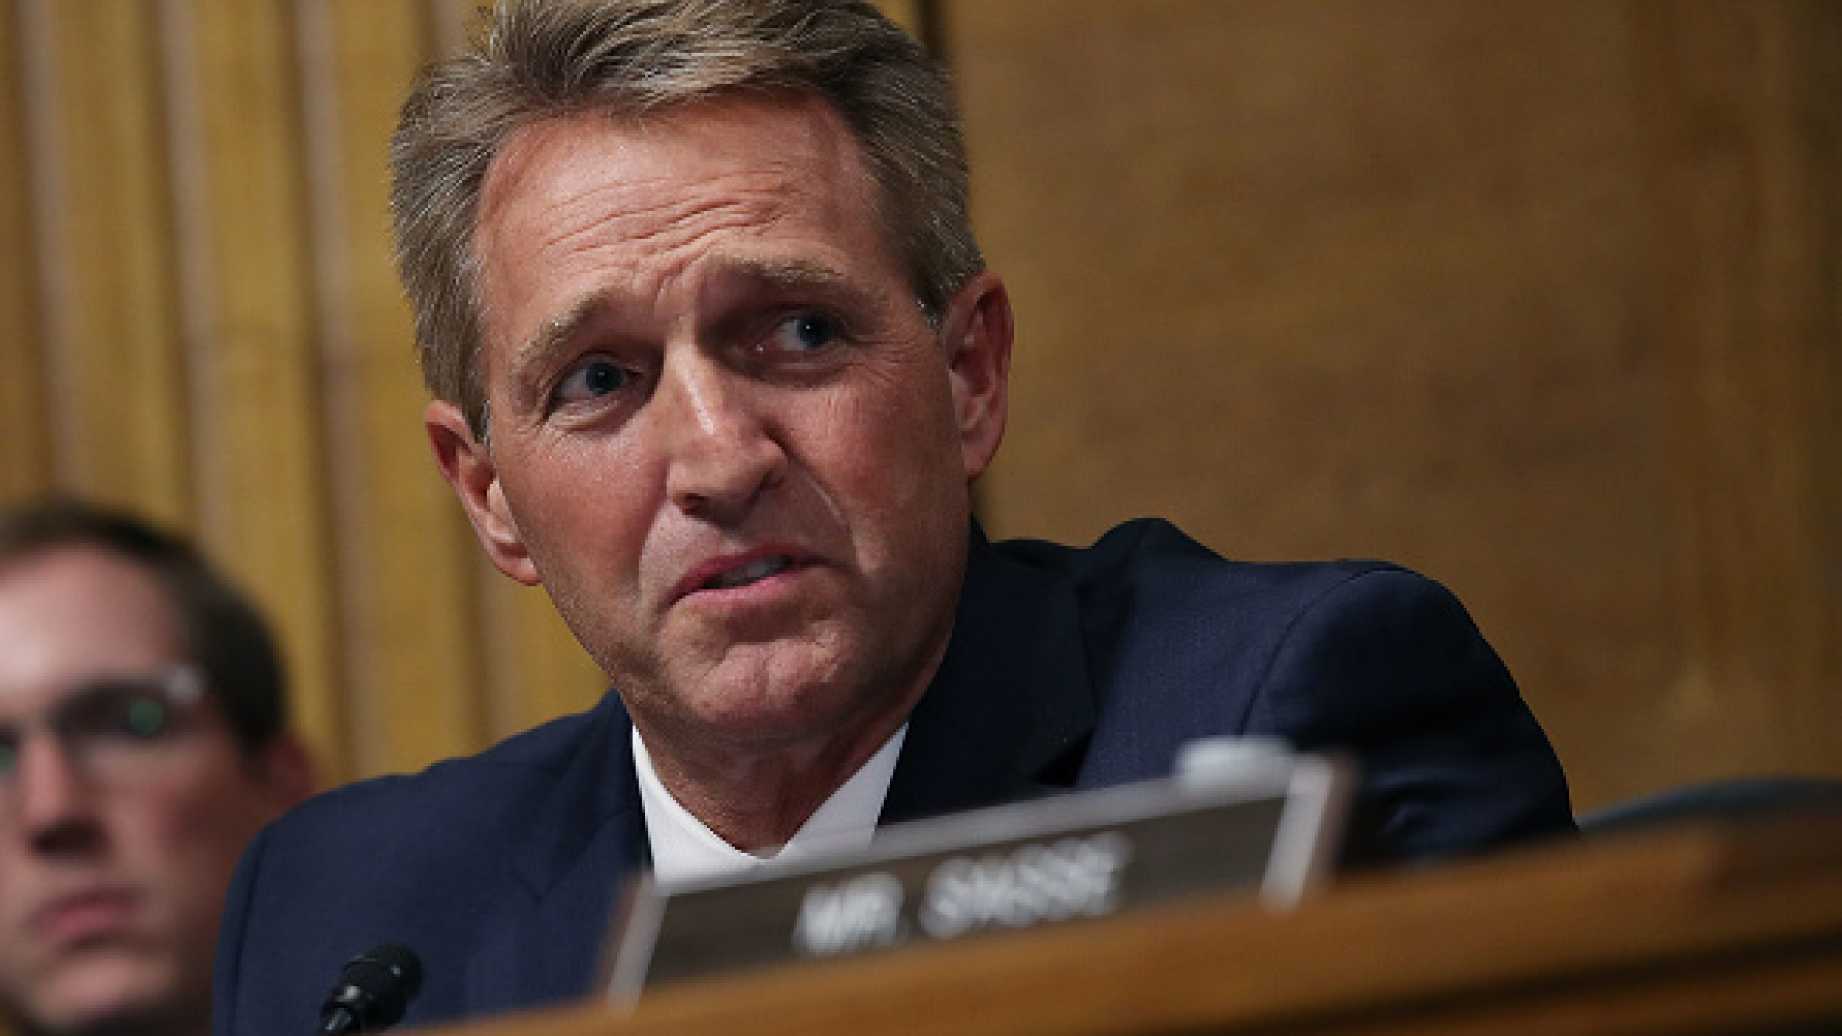 Will Jeff Flake Honor His Own Words?